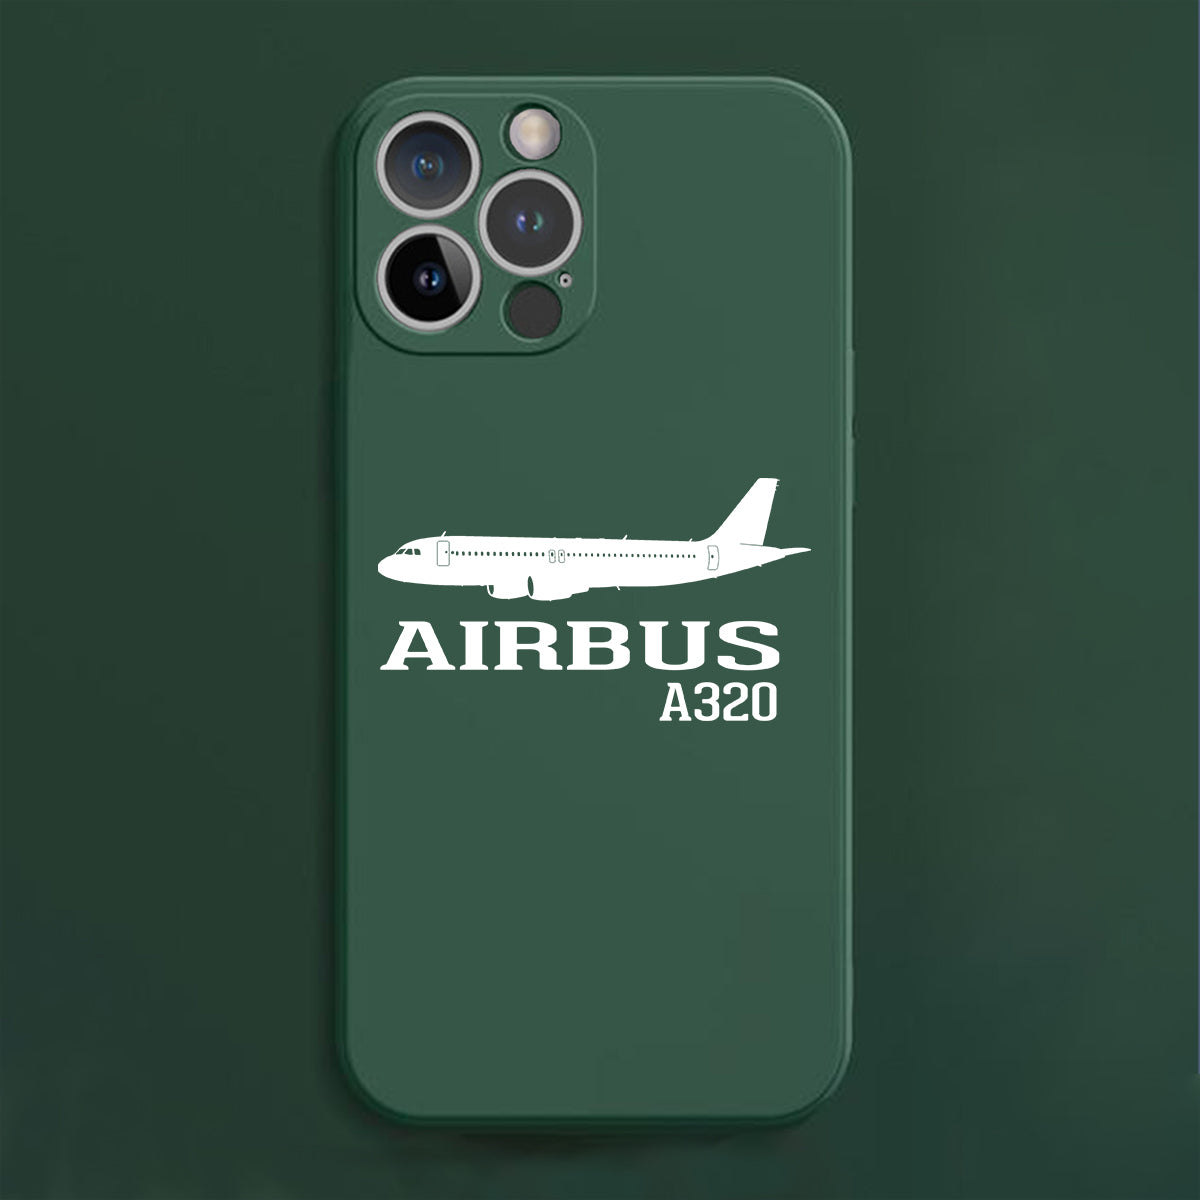 Airbus A320 Printed Designed Soft Silicone iPhone Cases